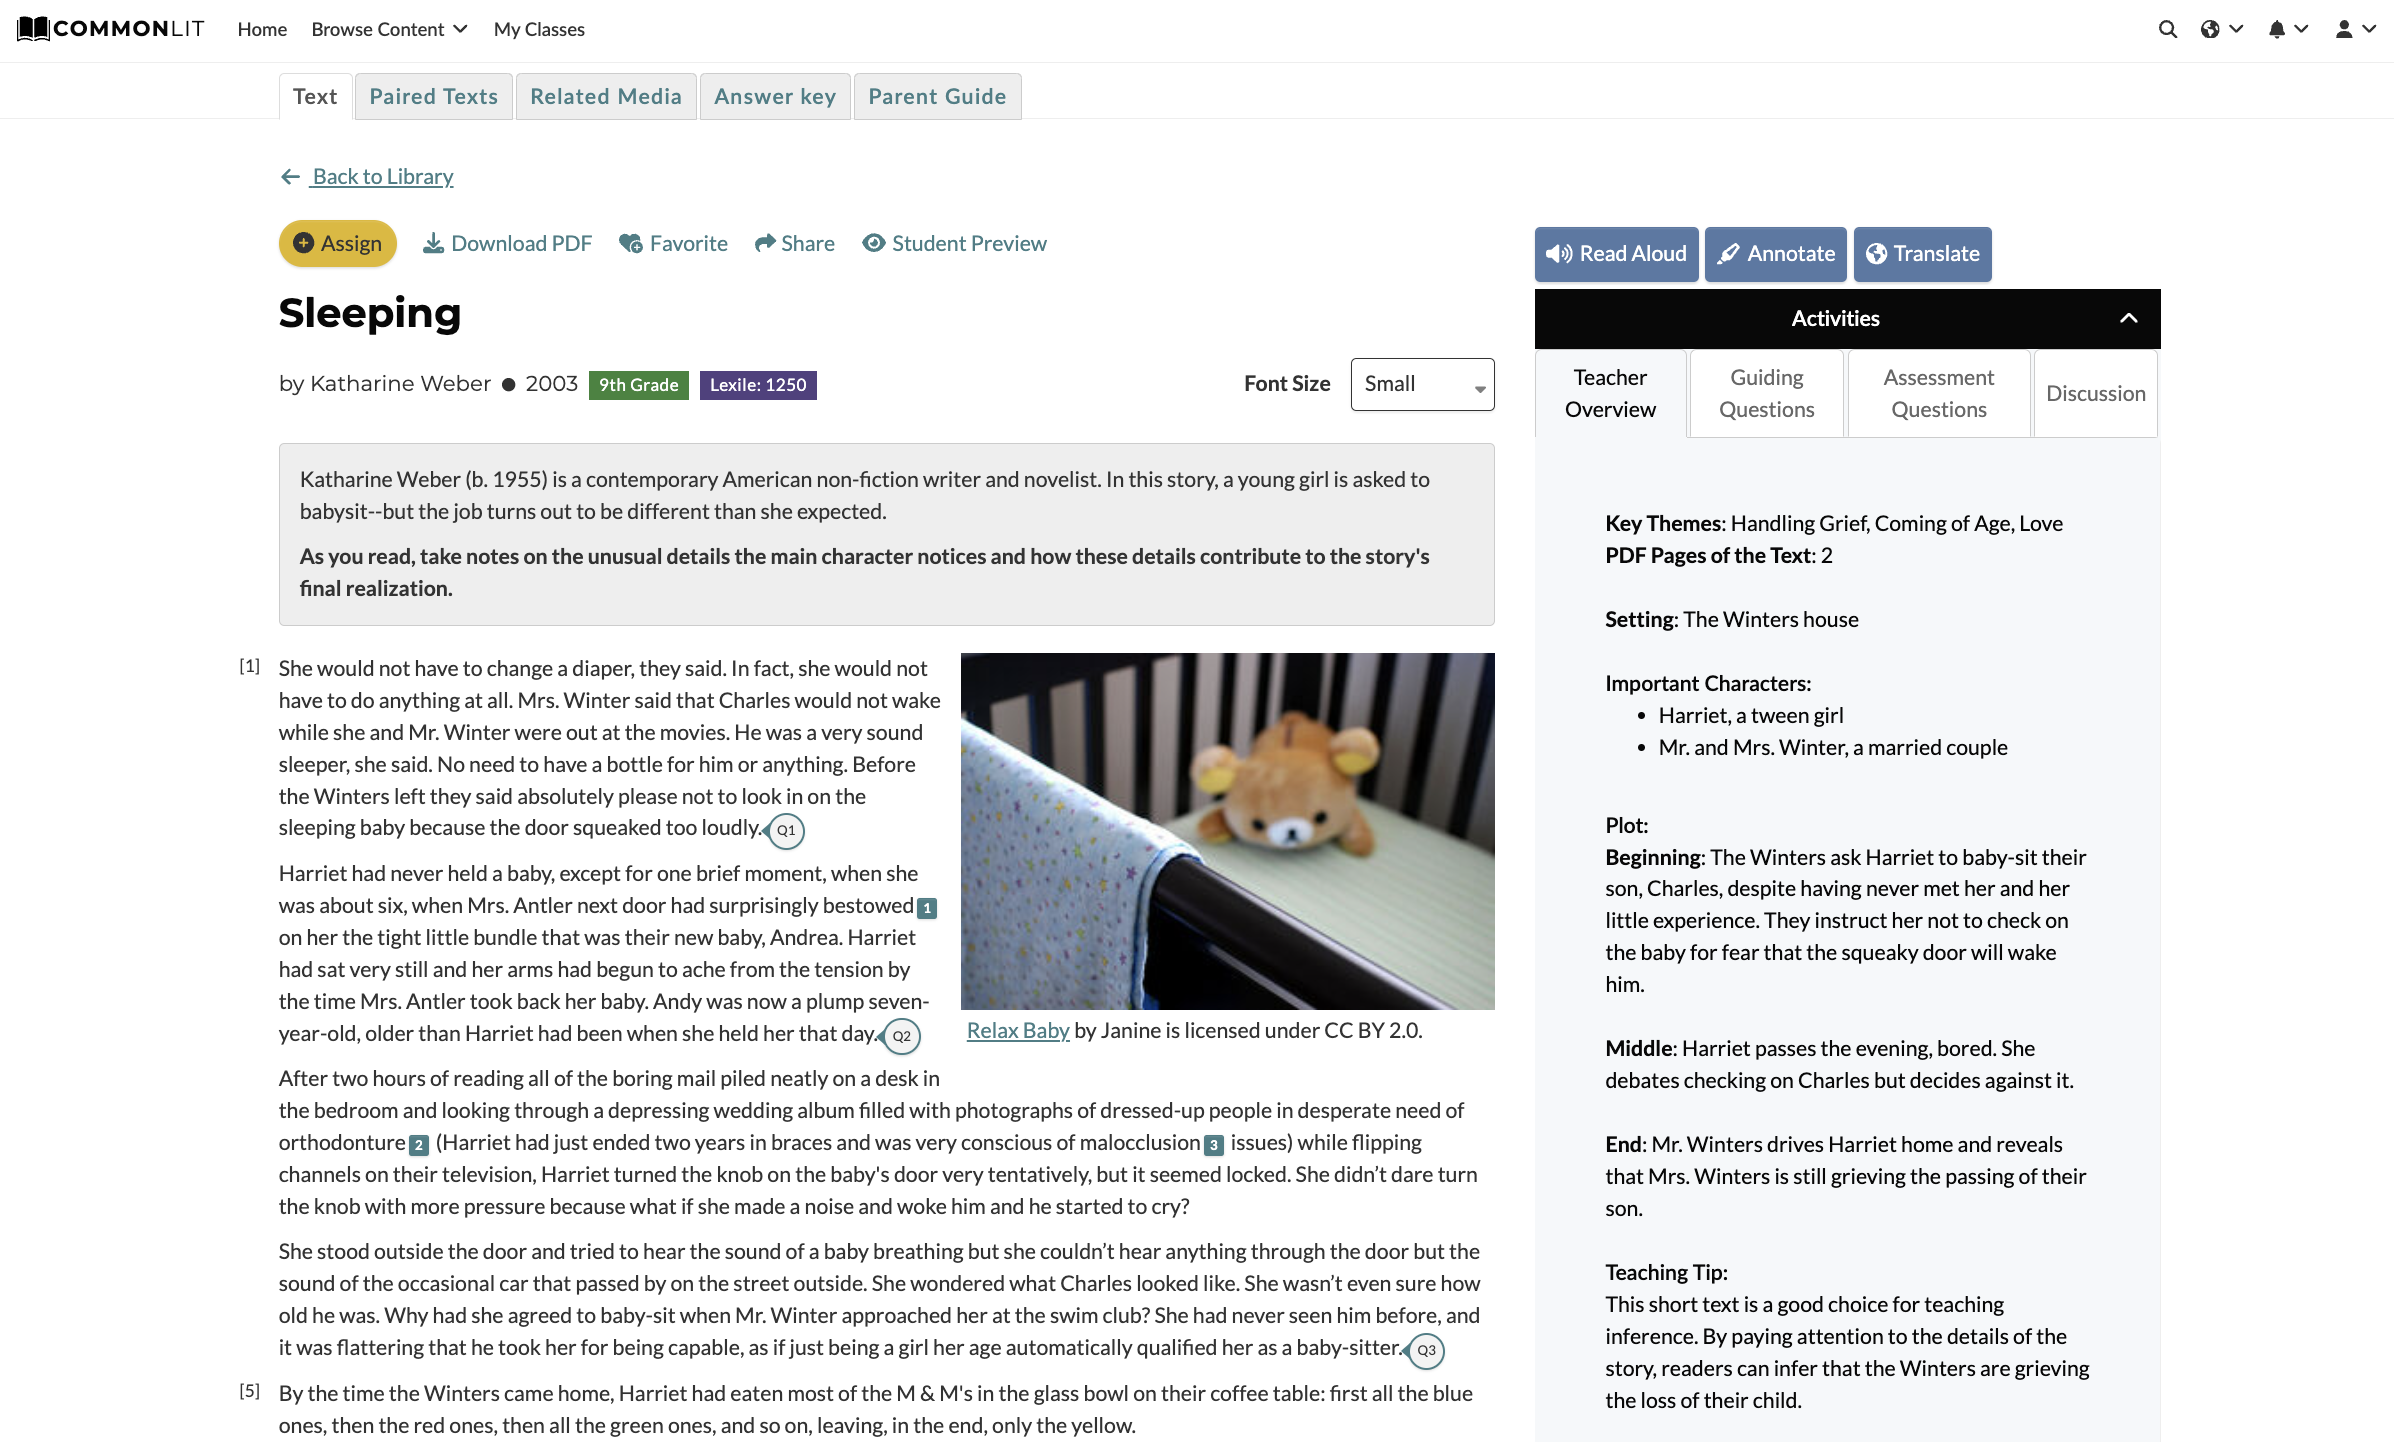 CommonLit text "Sleeping" with Annotation Tool highlighted